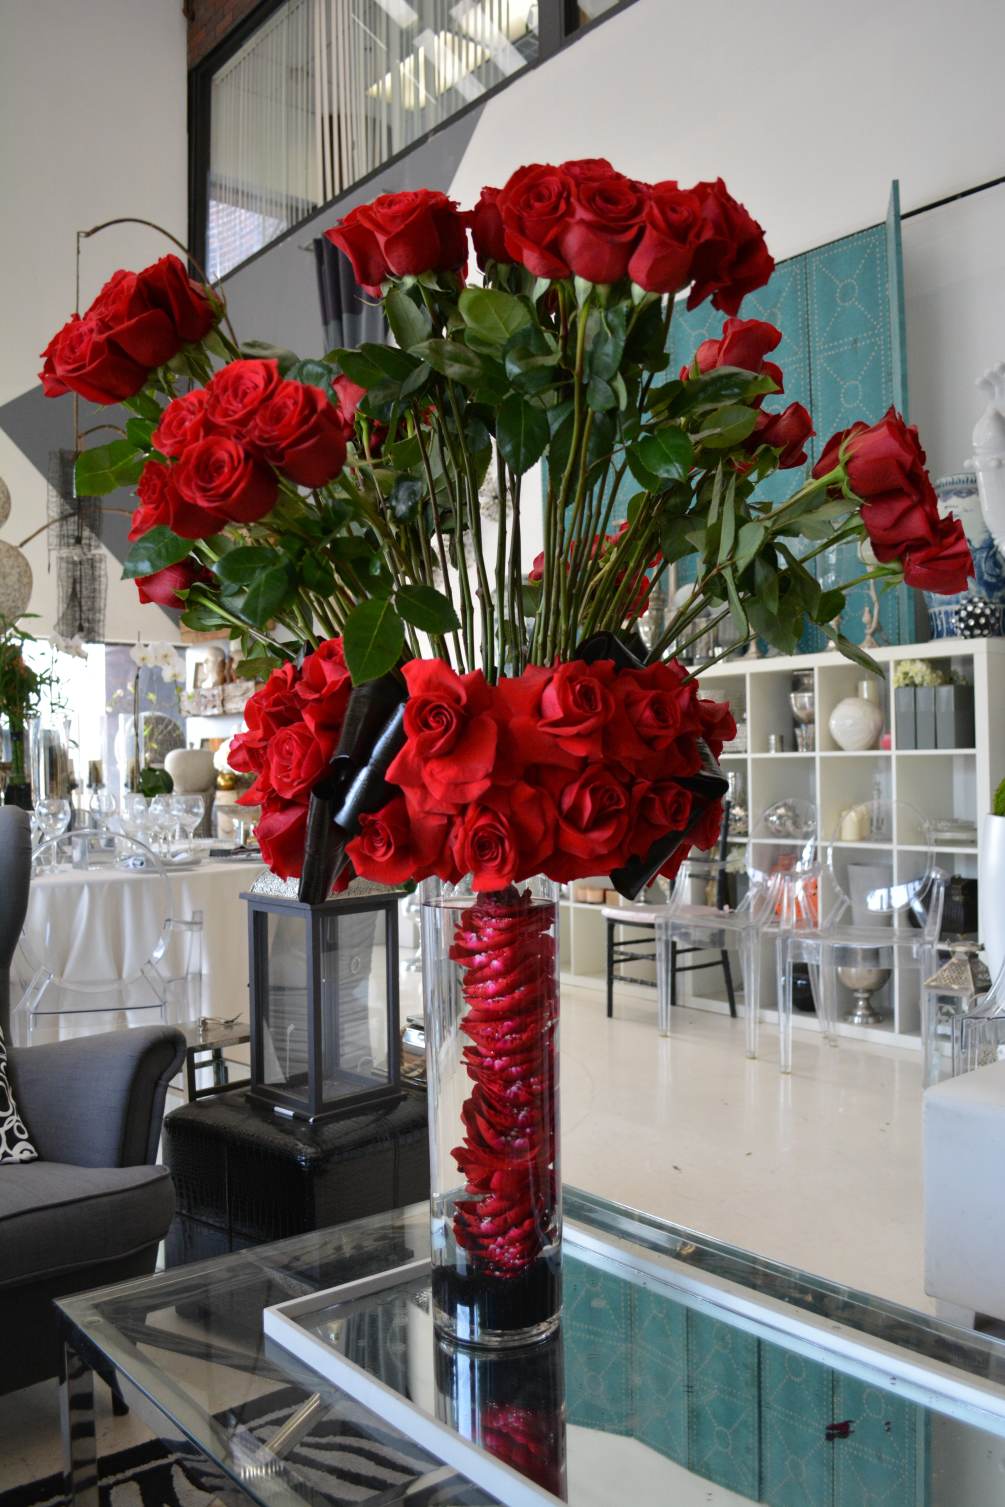 Grand Red Rose Arrangement with Submerged Red Roses in Cylinder Vase.

Approx 3ft